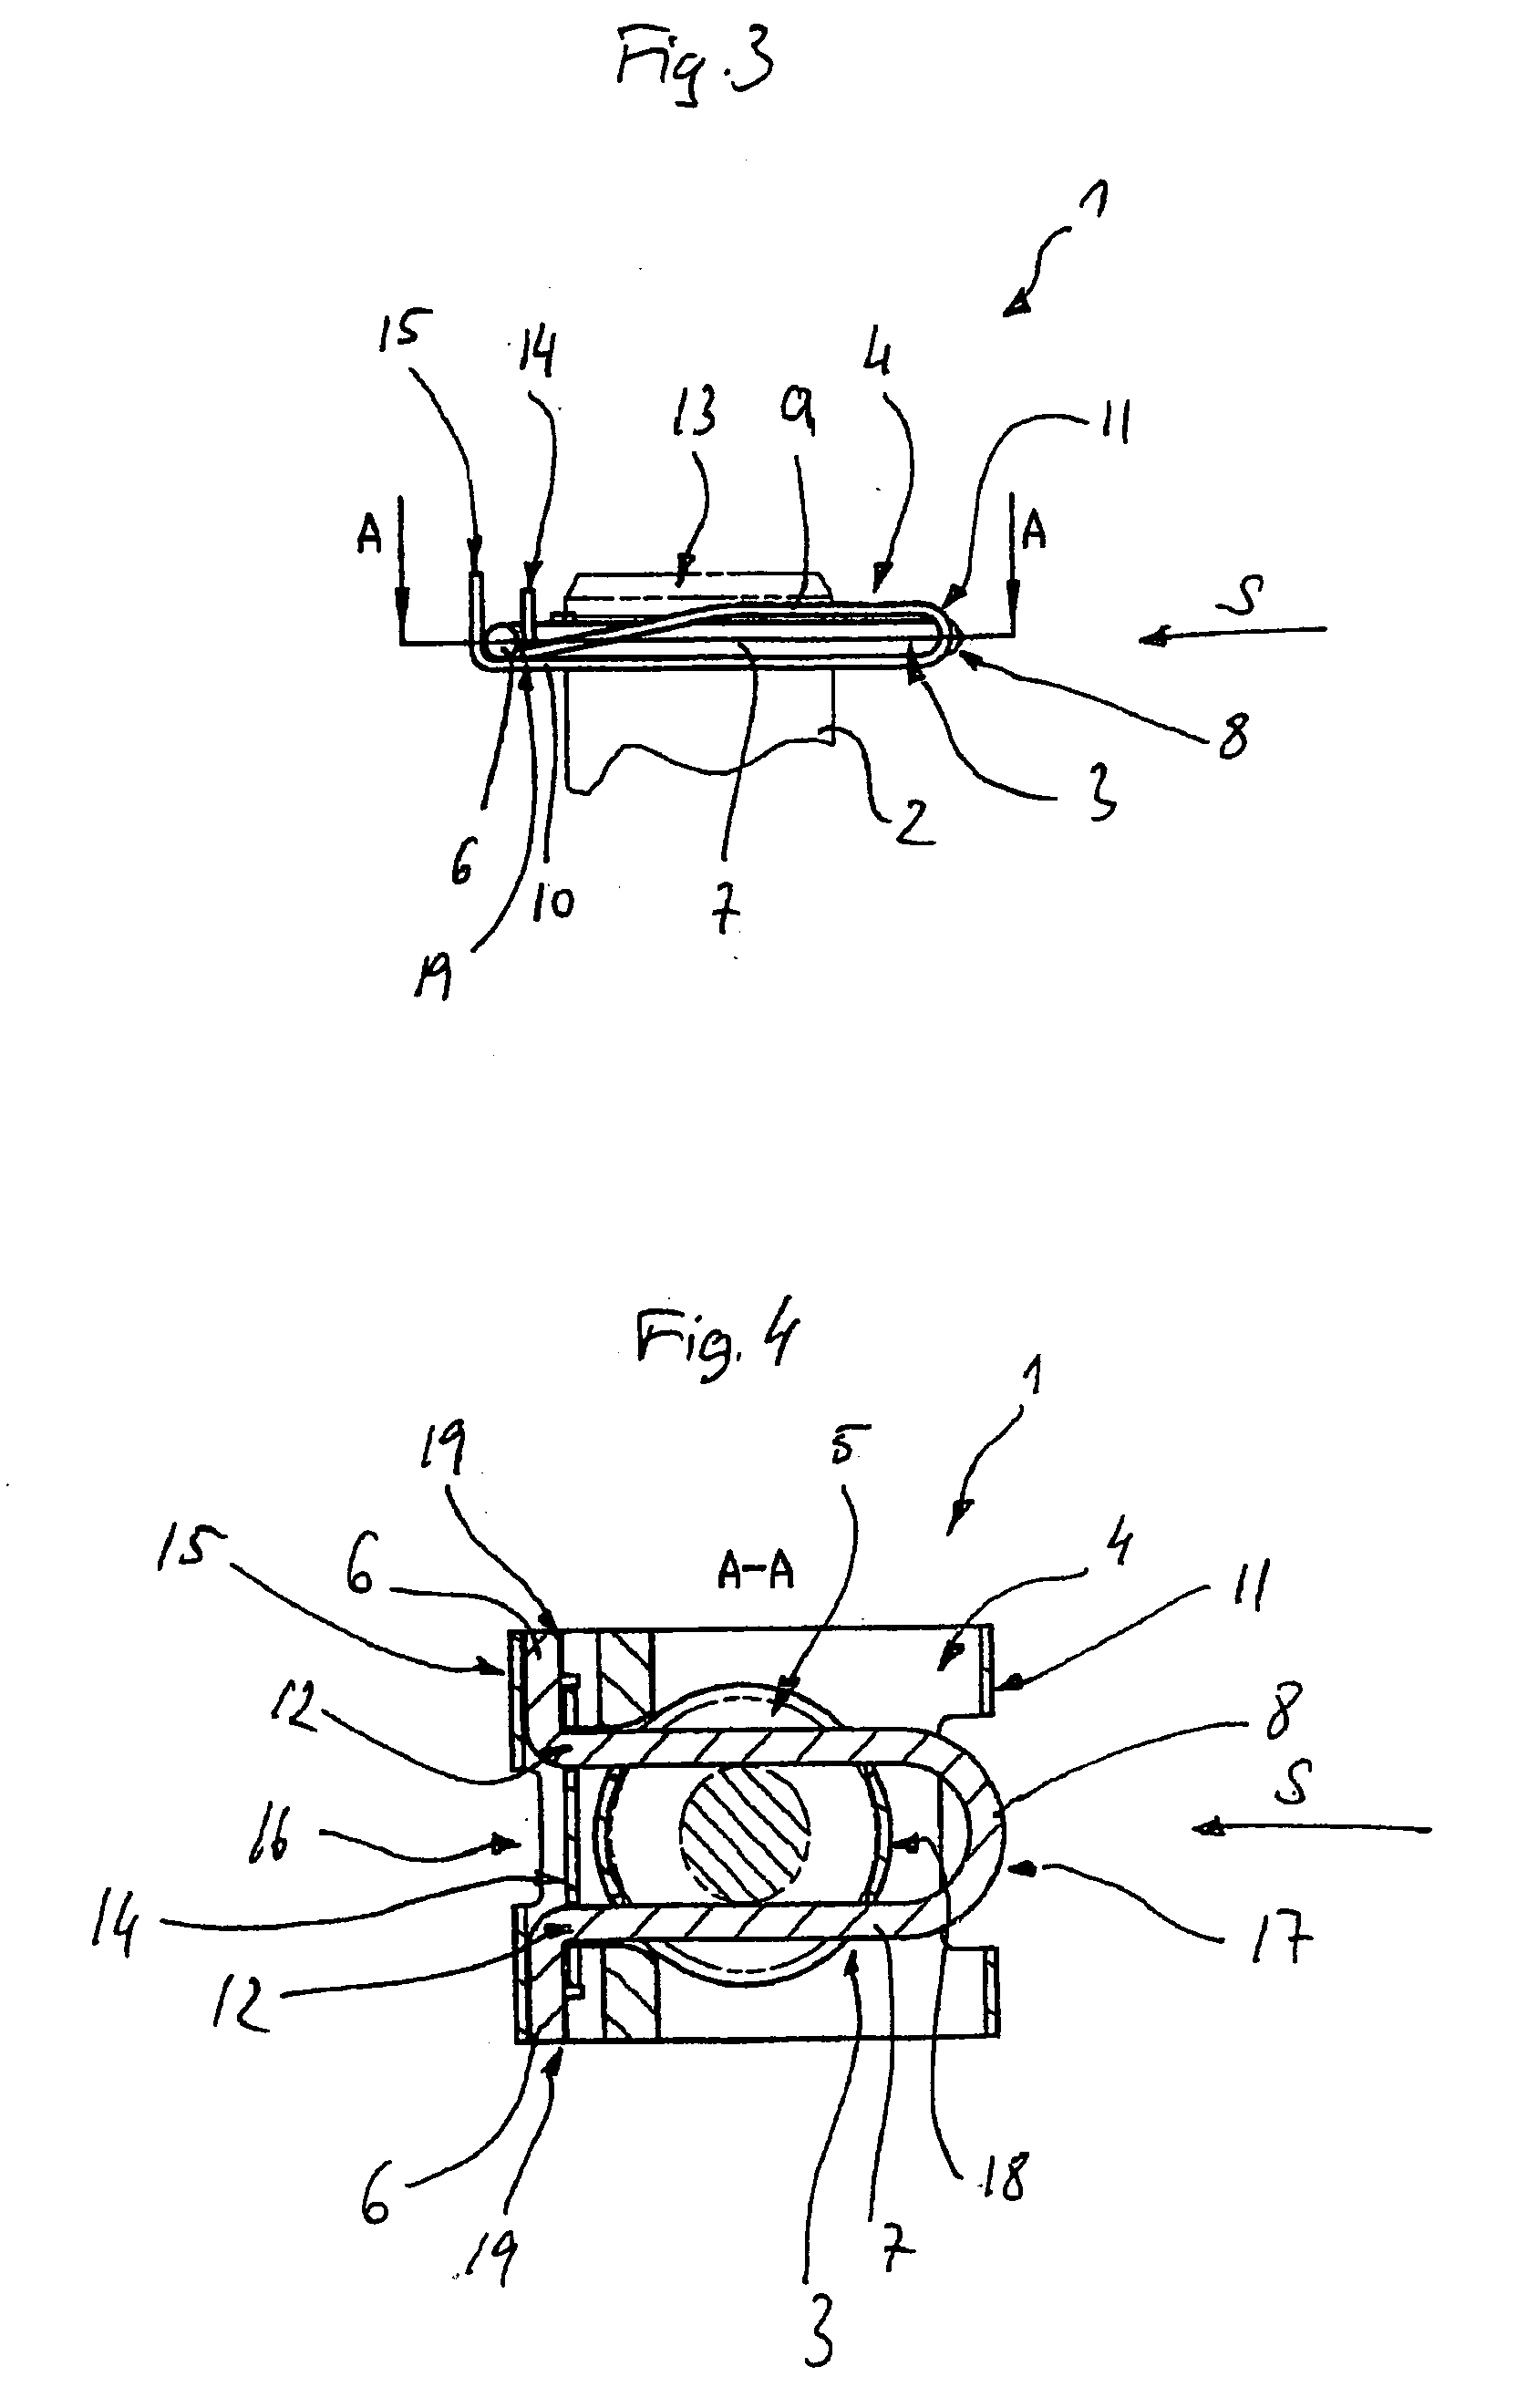 Arrangement for axial securing of grooved bolt